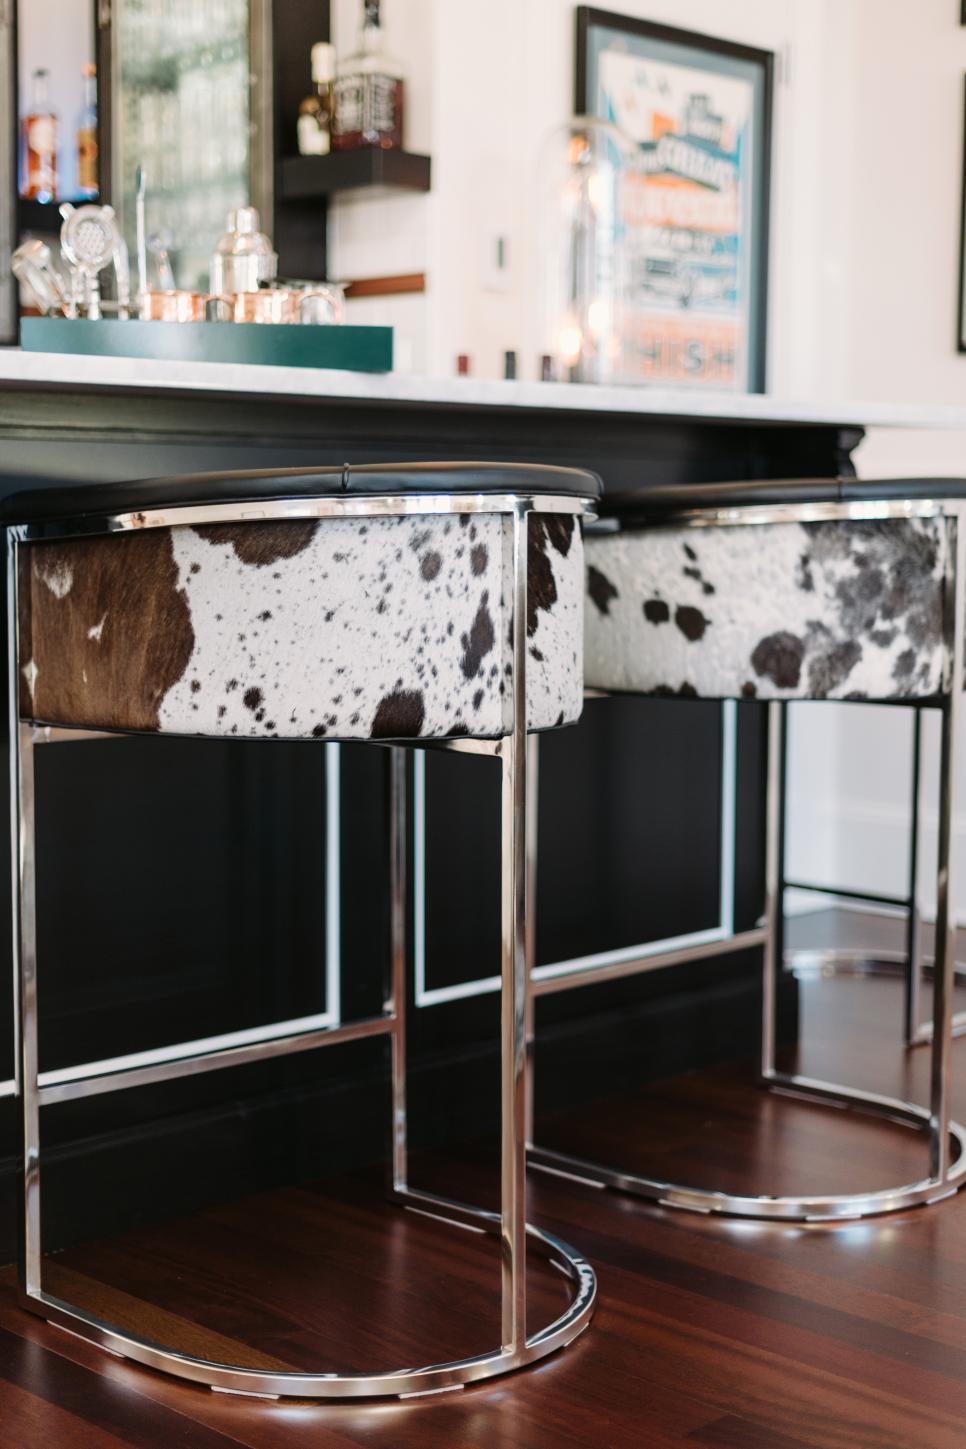 This Arteriors Calvin barrel-style tufted barstool is covered in top grain black and white hide leather. I spotted the cowhide barstool on HGTV.com.